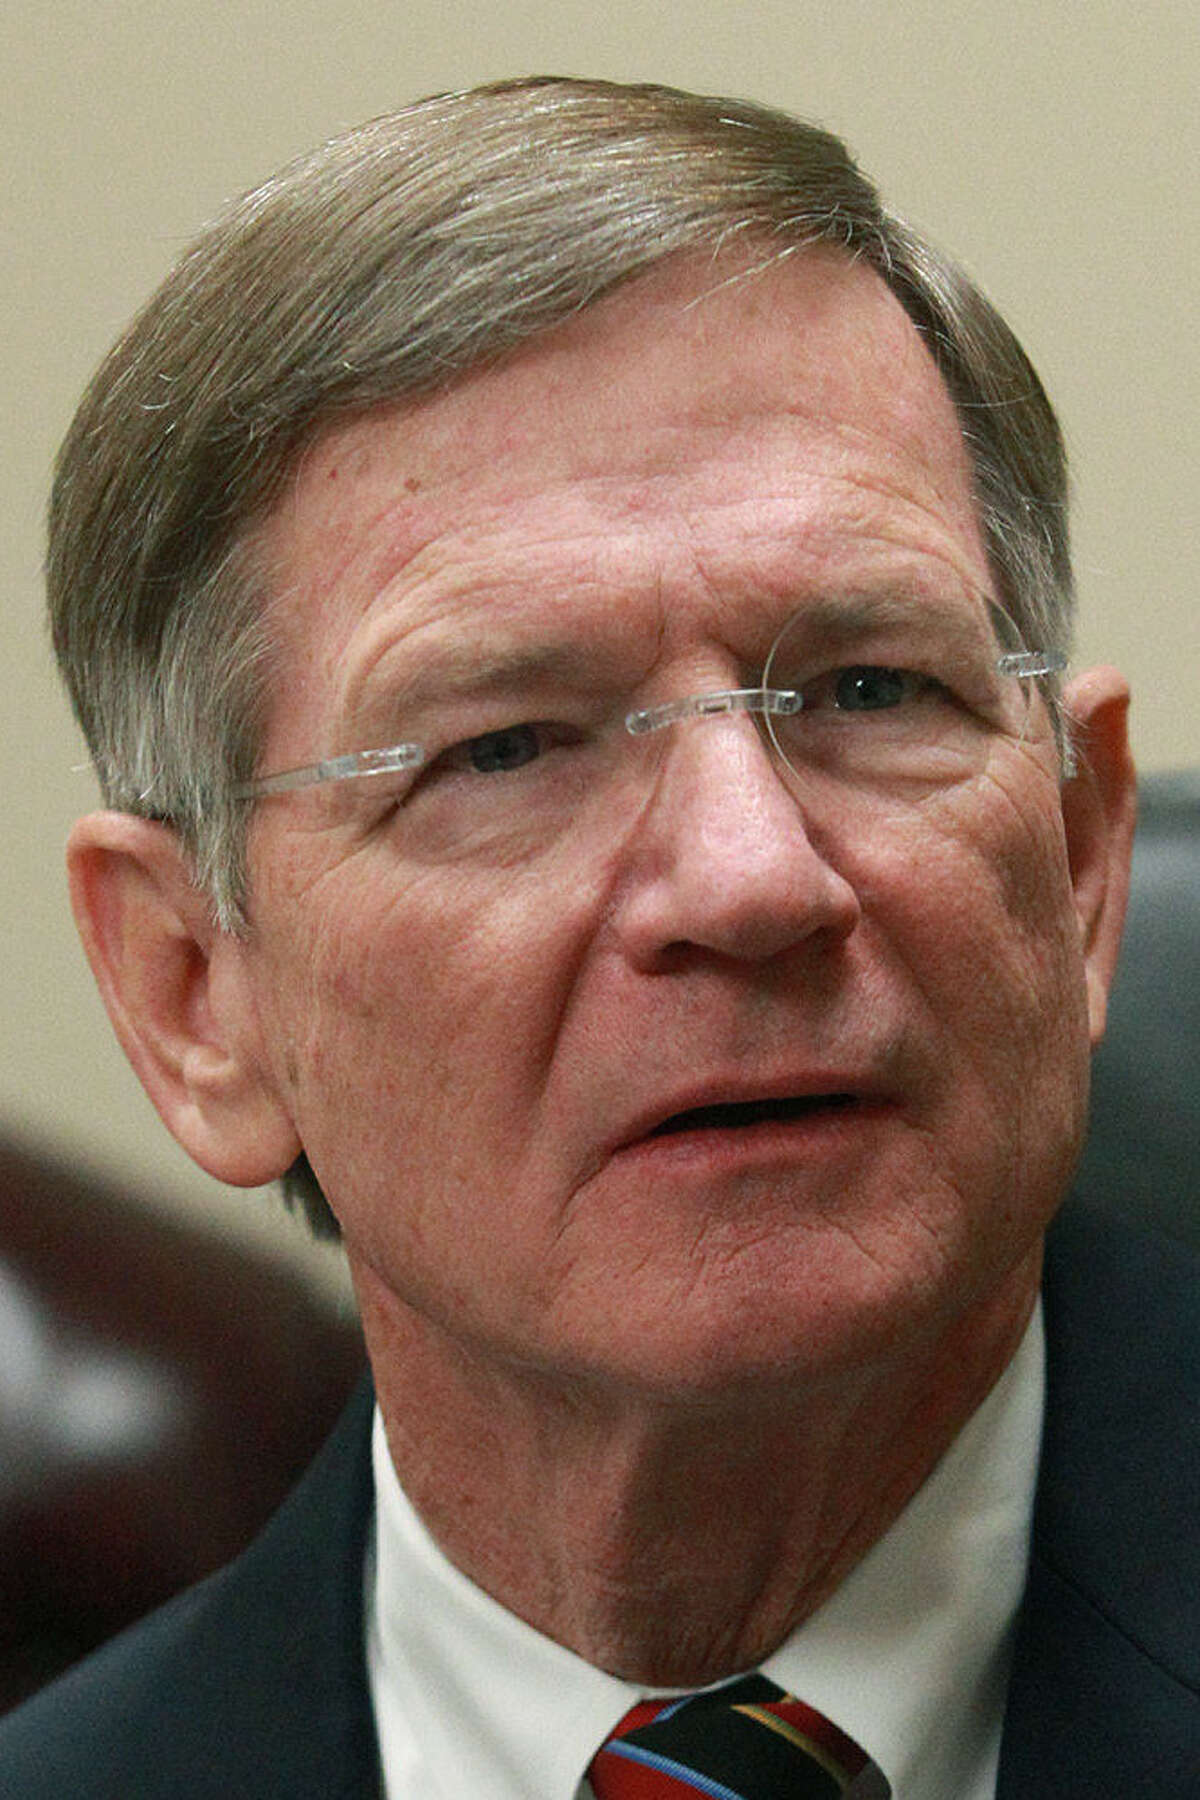 Rep. Lamar Smith came in No. 1 out of 449 House members who served in the 112th Congress.